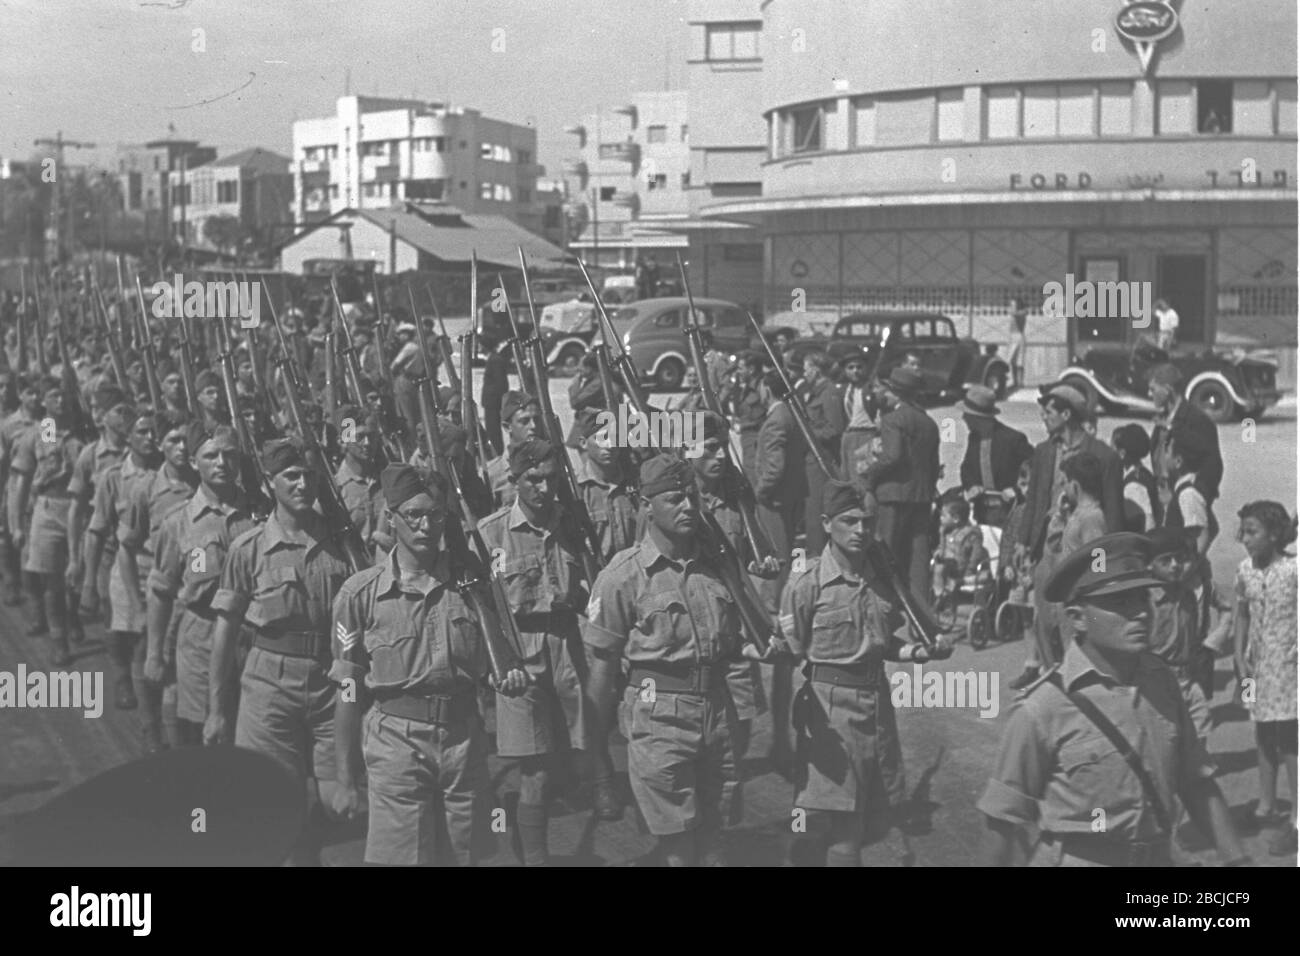 English Jewish Soliders In The British Army Marching On Petah Tikva Road In Tel Aviv On Jewish Soldiers Day O I U I O O O U I O I I I O E O U I U U I C U O O O U O U O I I I O U I U C O